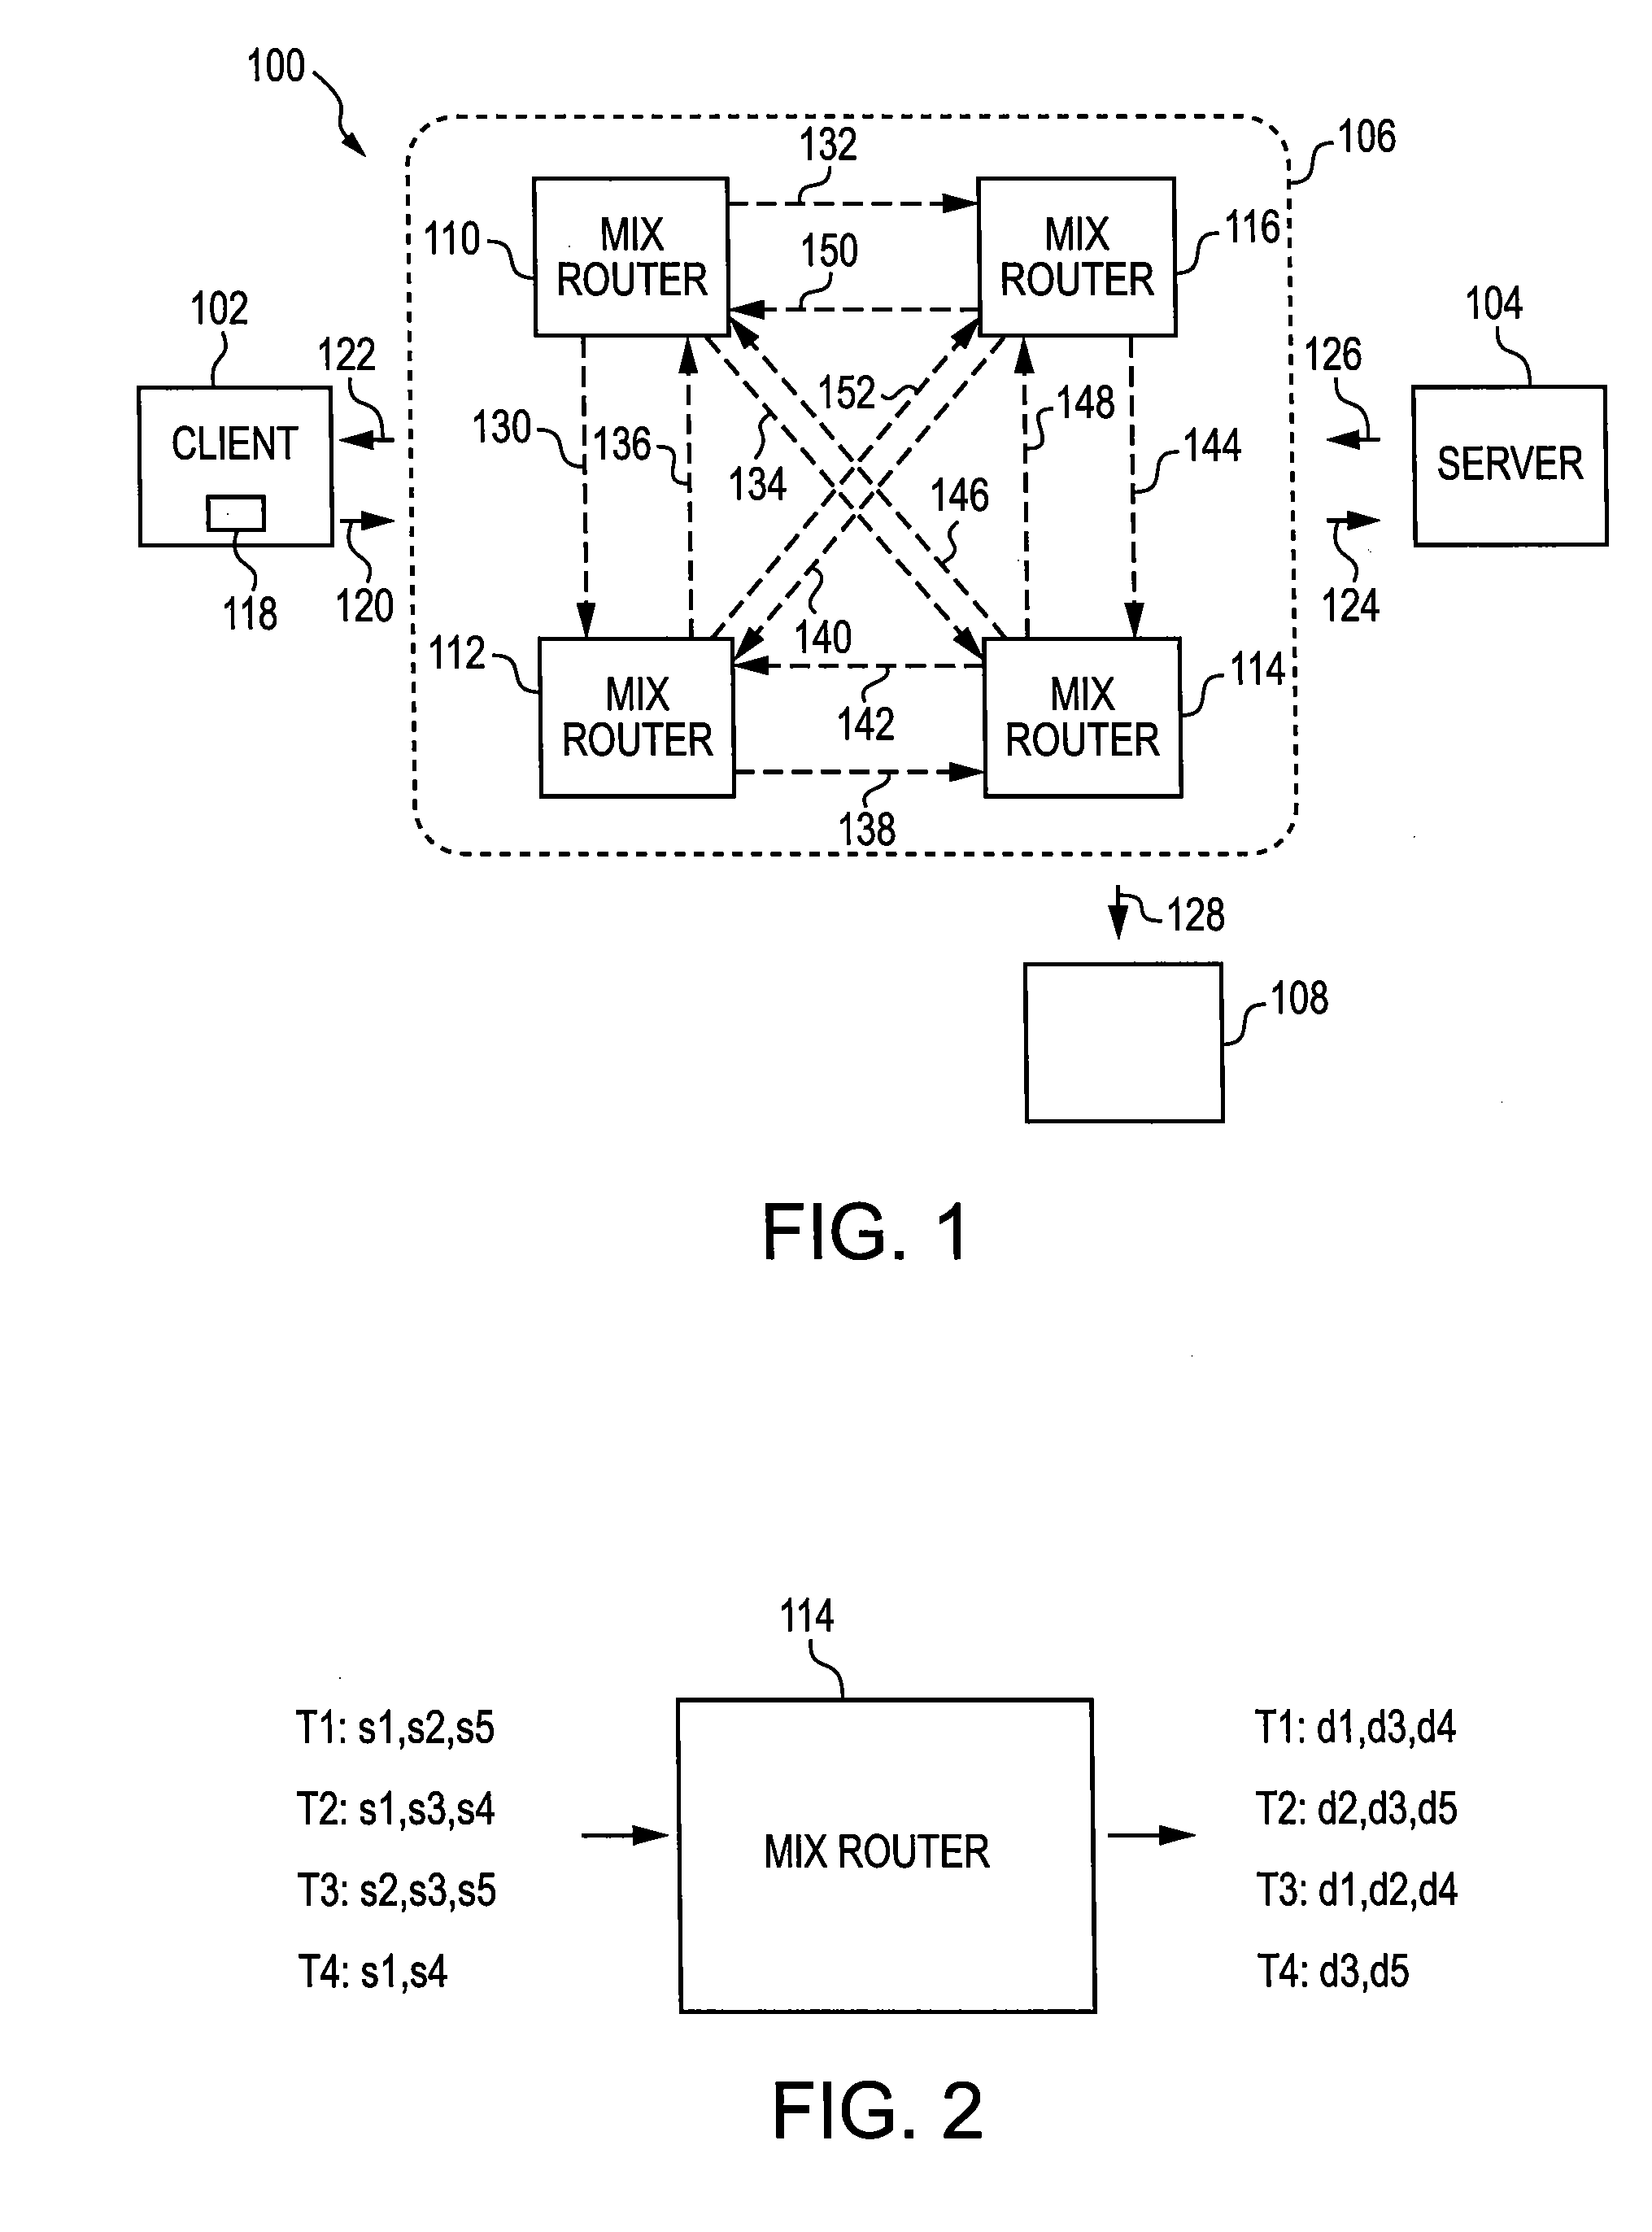 System and Method of Encrypting Network Address for Anonymity and Preventing Data Exfiltration